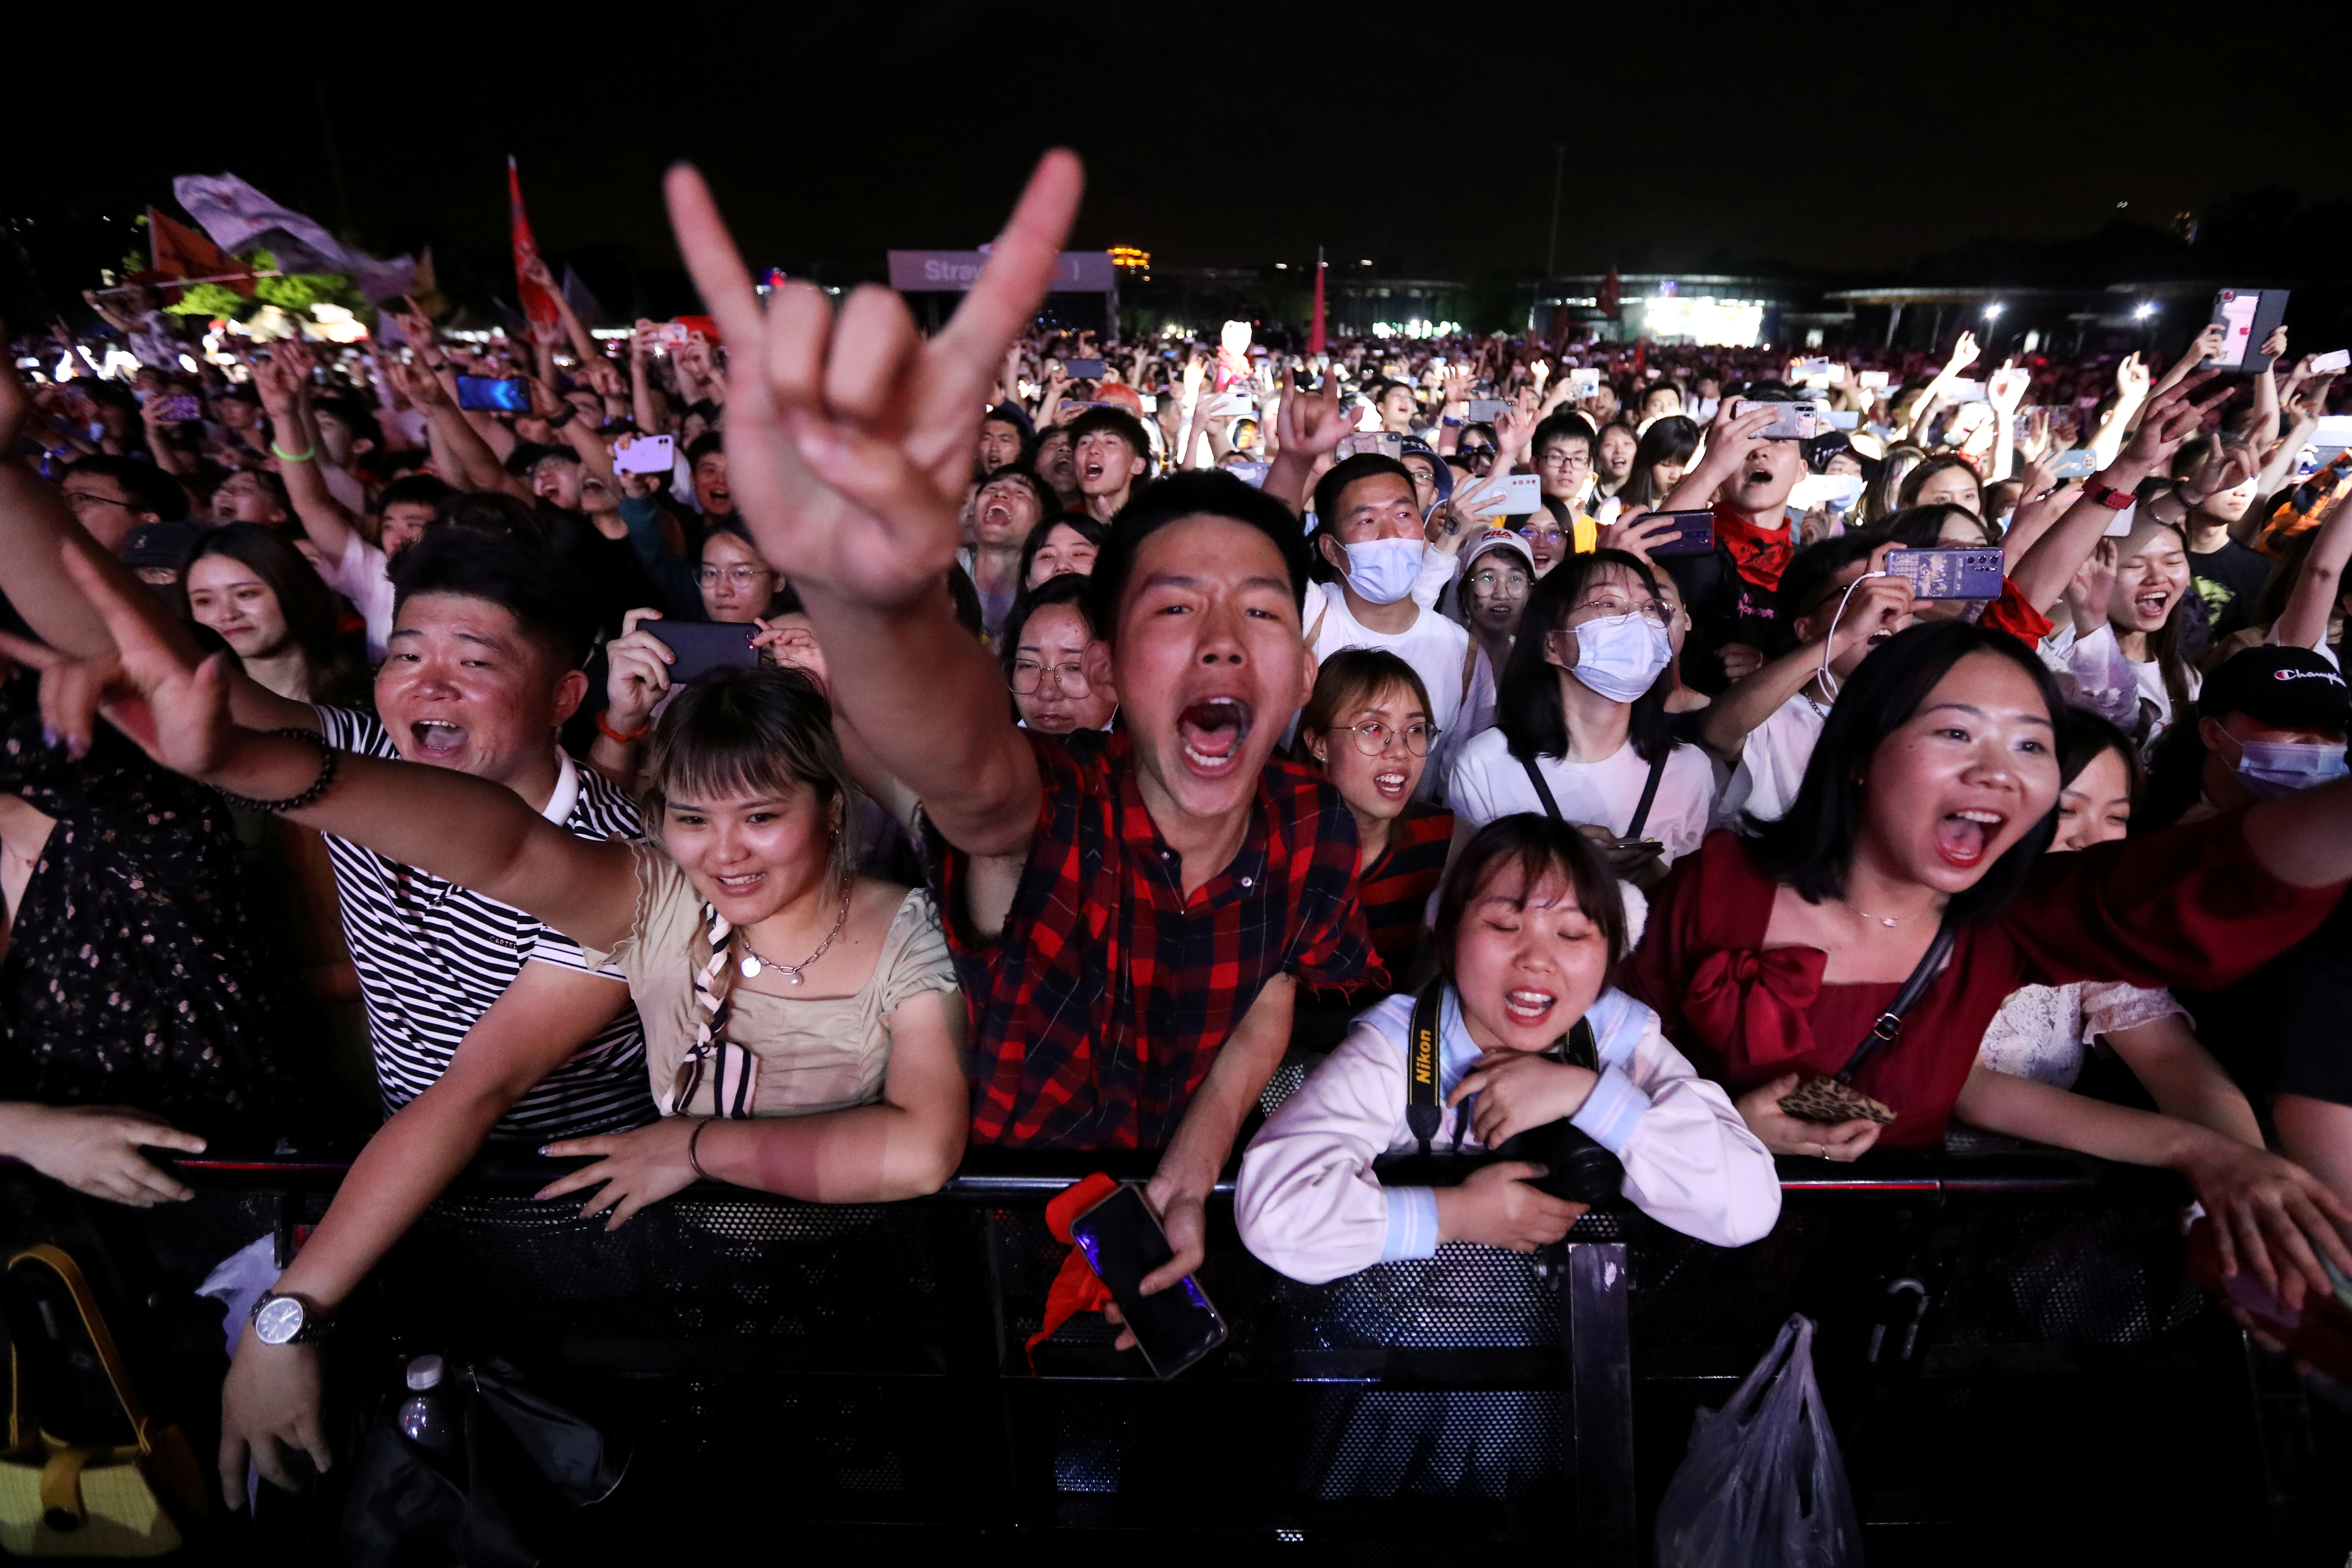 Fans attend a performance of a rock band at the Strawberry Music Festival during Labour Day holiday in Wuhan, Hubei Province, China May 1, 2021. REUTERS/Tingshu Wang TPX IMAGES OF THE DAY